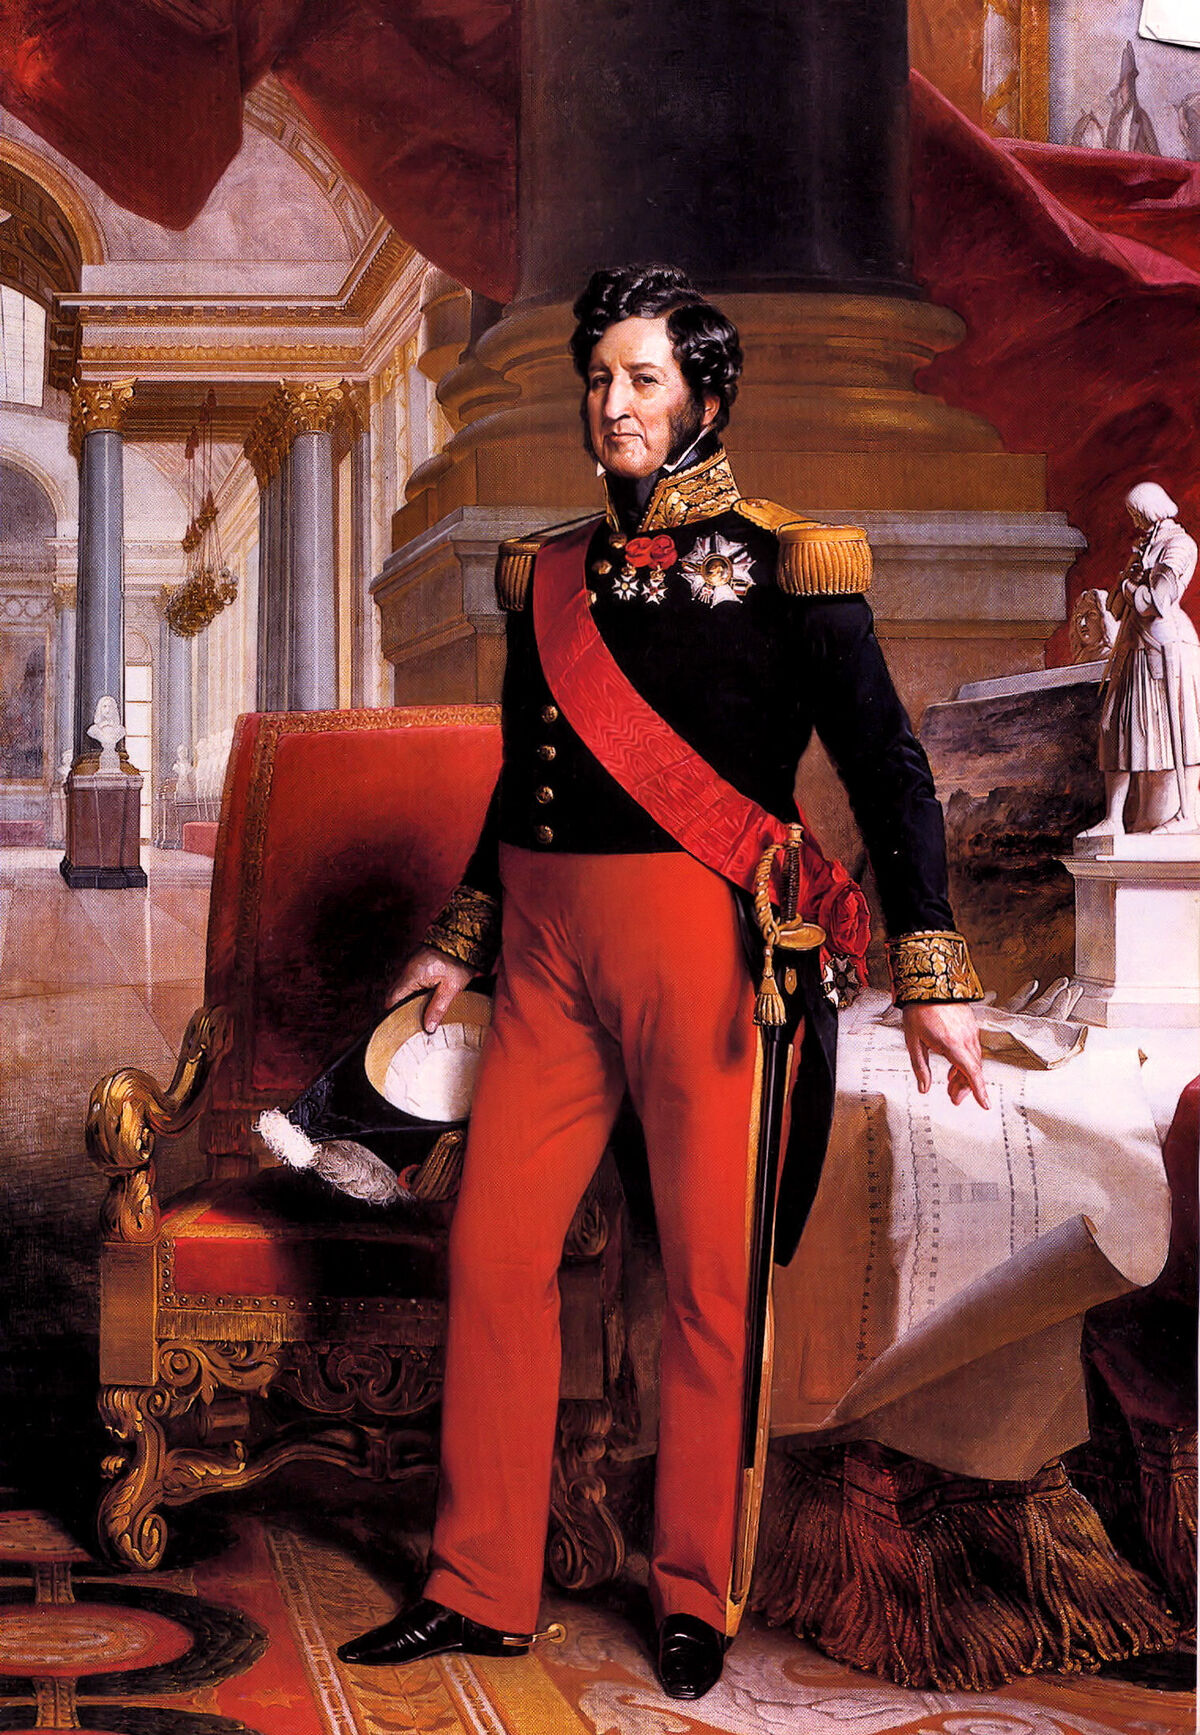 Revolution of 1830: “King Louis Philippe I (1773-1850) swore to maintain  the Charter of 1830 in the presence of the chambers reunited in the